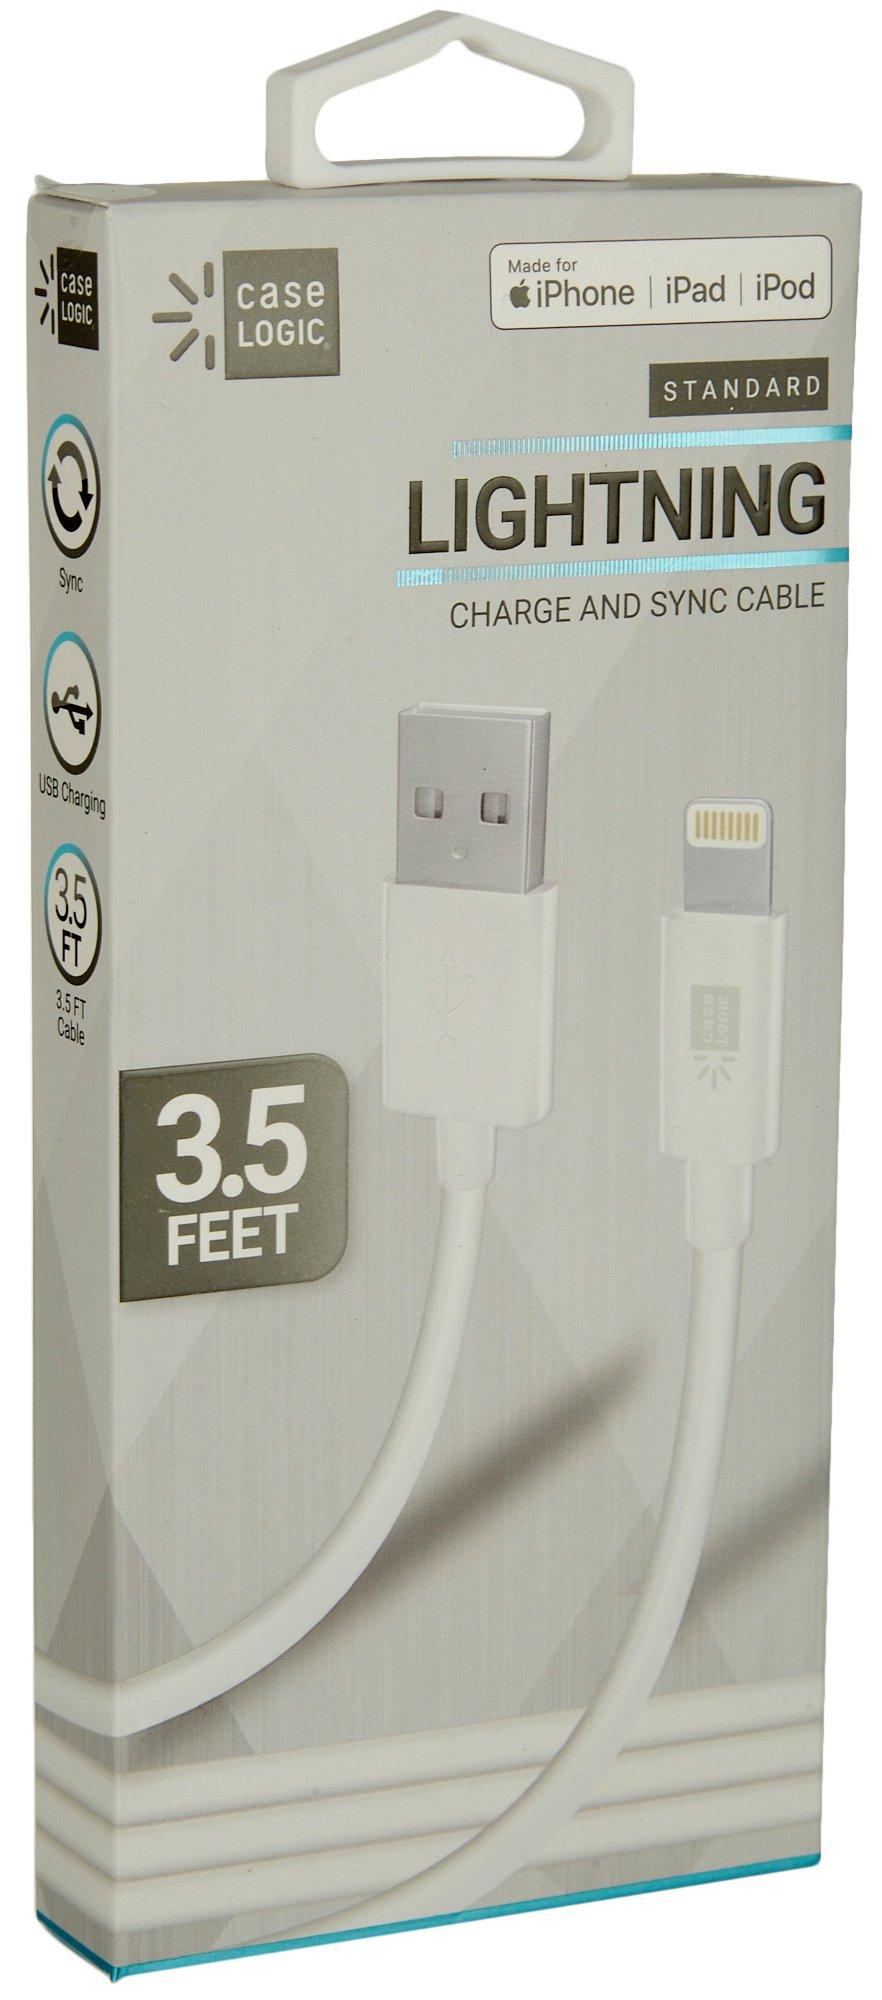 Standard Lighting Charge And Sync Cable